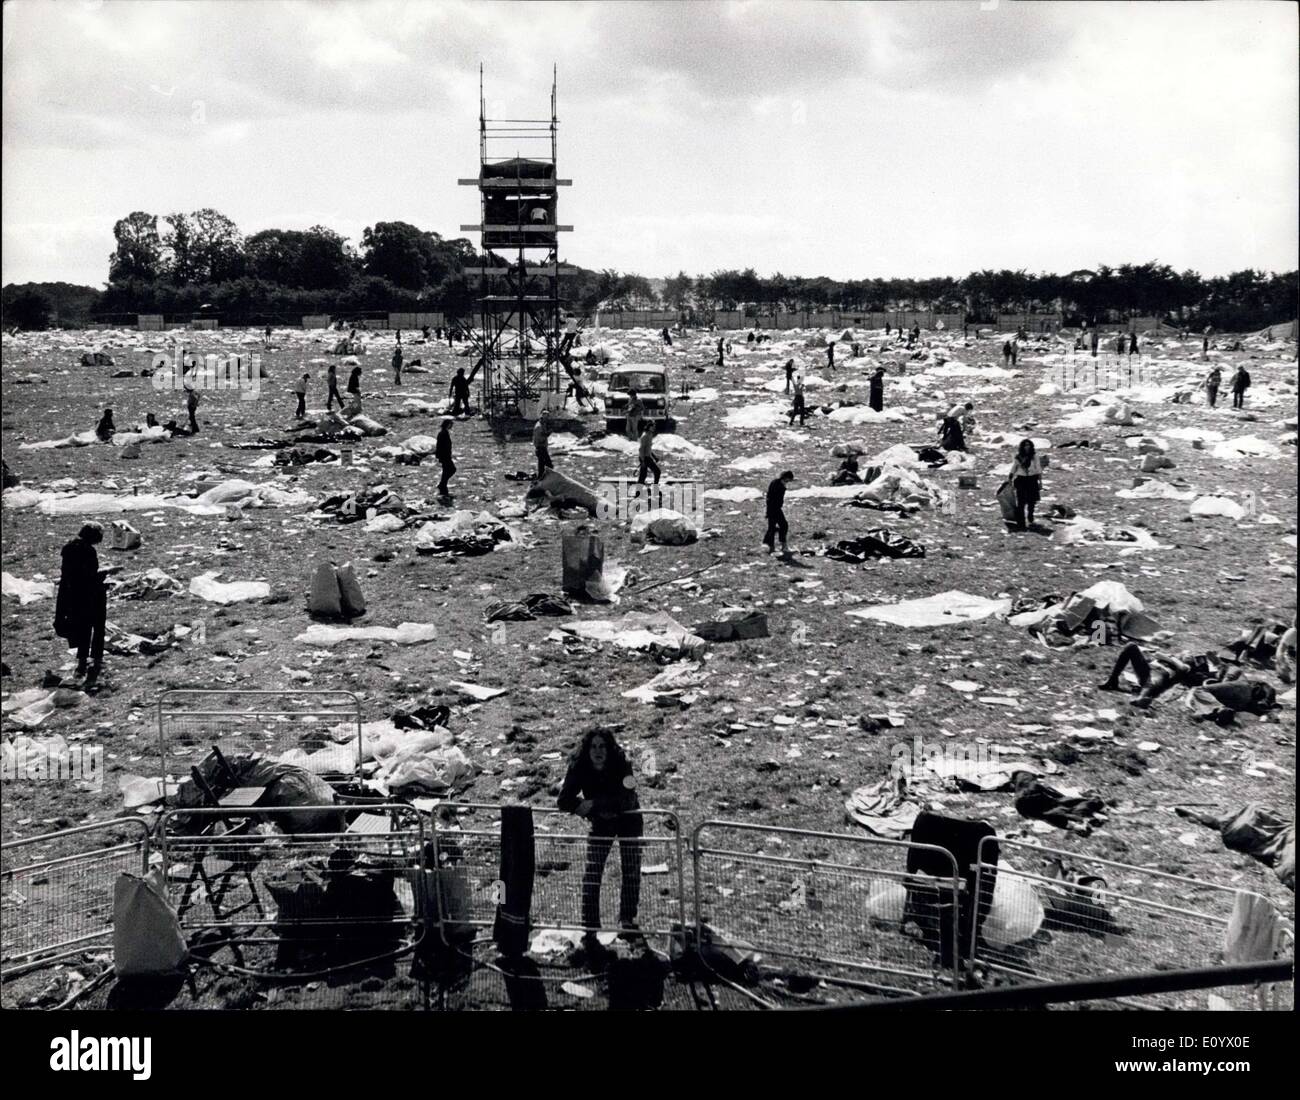 Aug. 31, 1971 - At the end of the Weeley Pop Festival: An estimated 140,000 people flocked to the 200-acre site at the Essex village of Weeley. They left hundreds of tons of rubbish which was being cleared by the organisers, members of Clacton Round Table. Photo shows the vast pop audience has left and the grass can be seen again through the hundreds of tons of rubbish which was being removed yesterday to enable the Essex village of Weeley to return to normal. Stock Photo